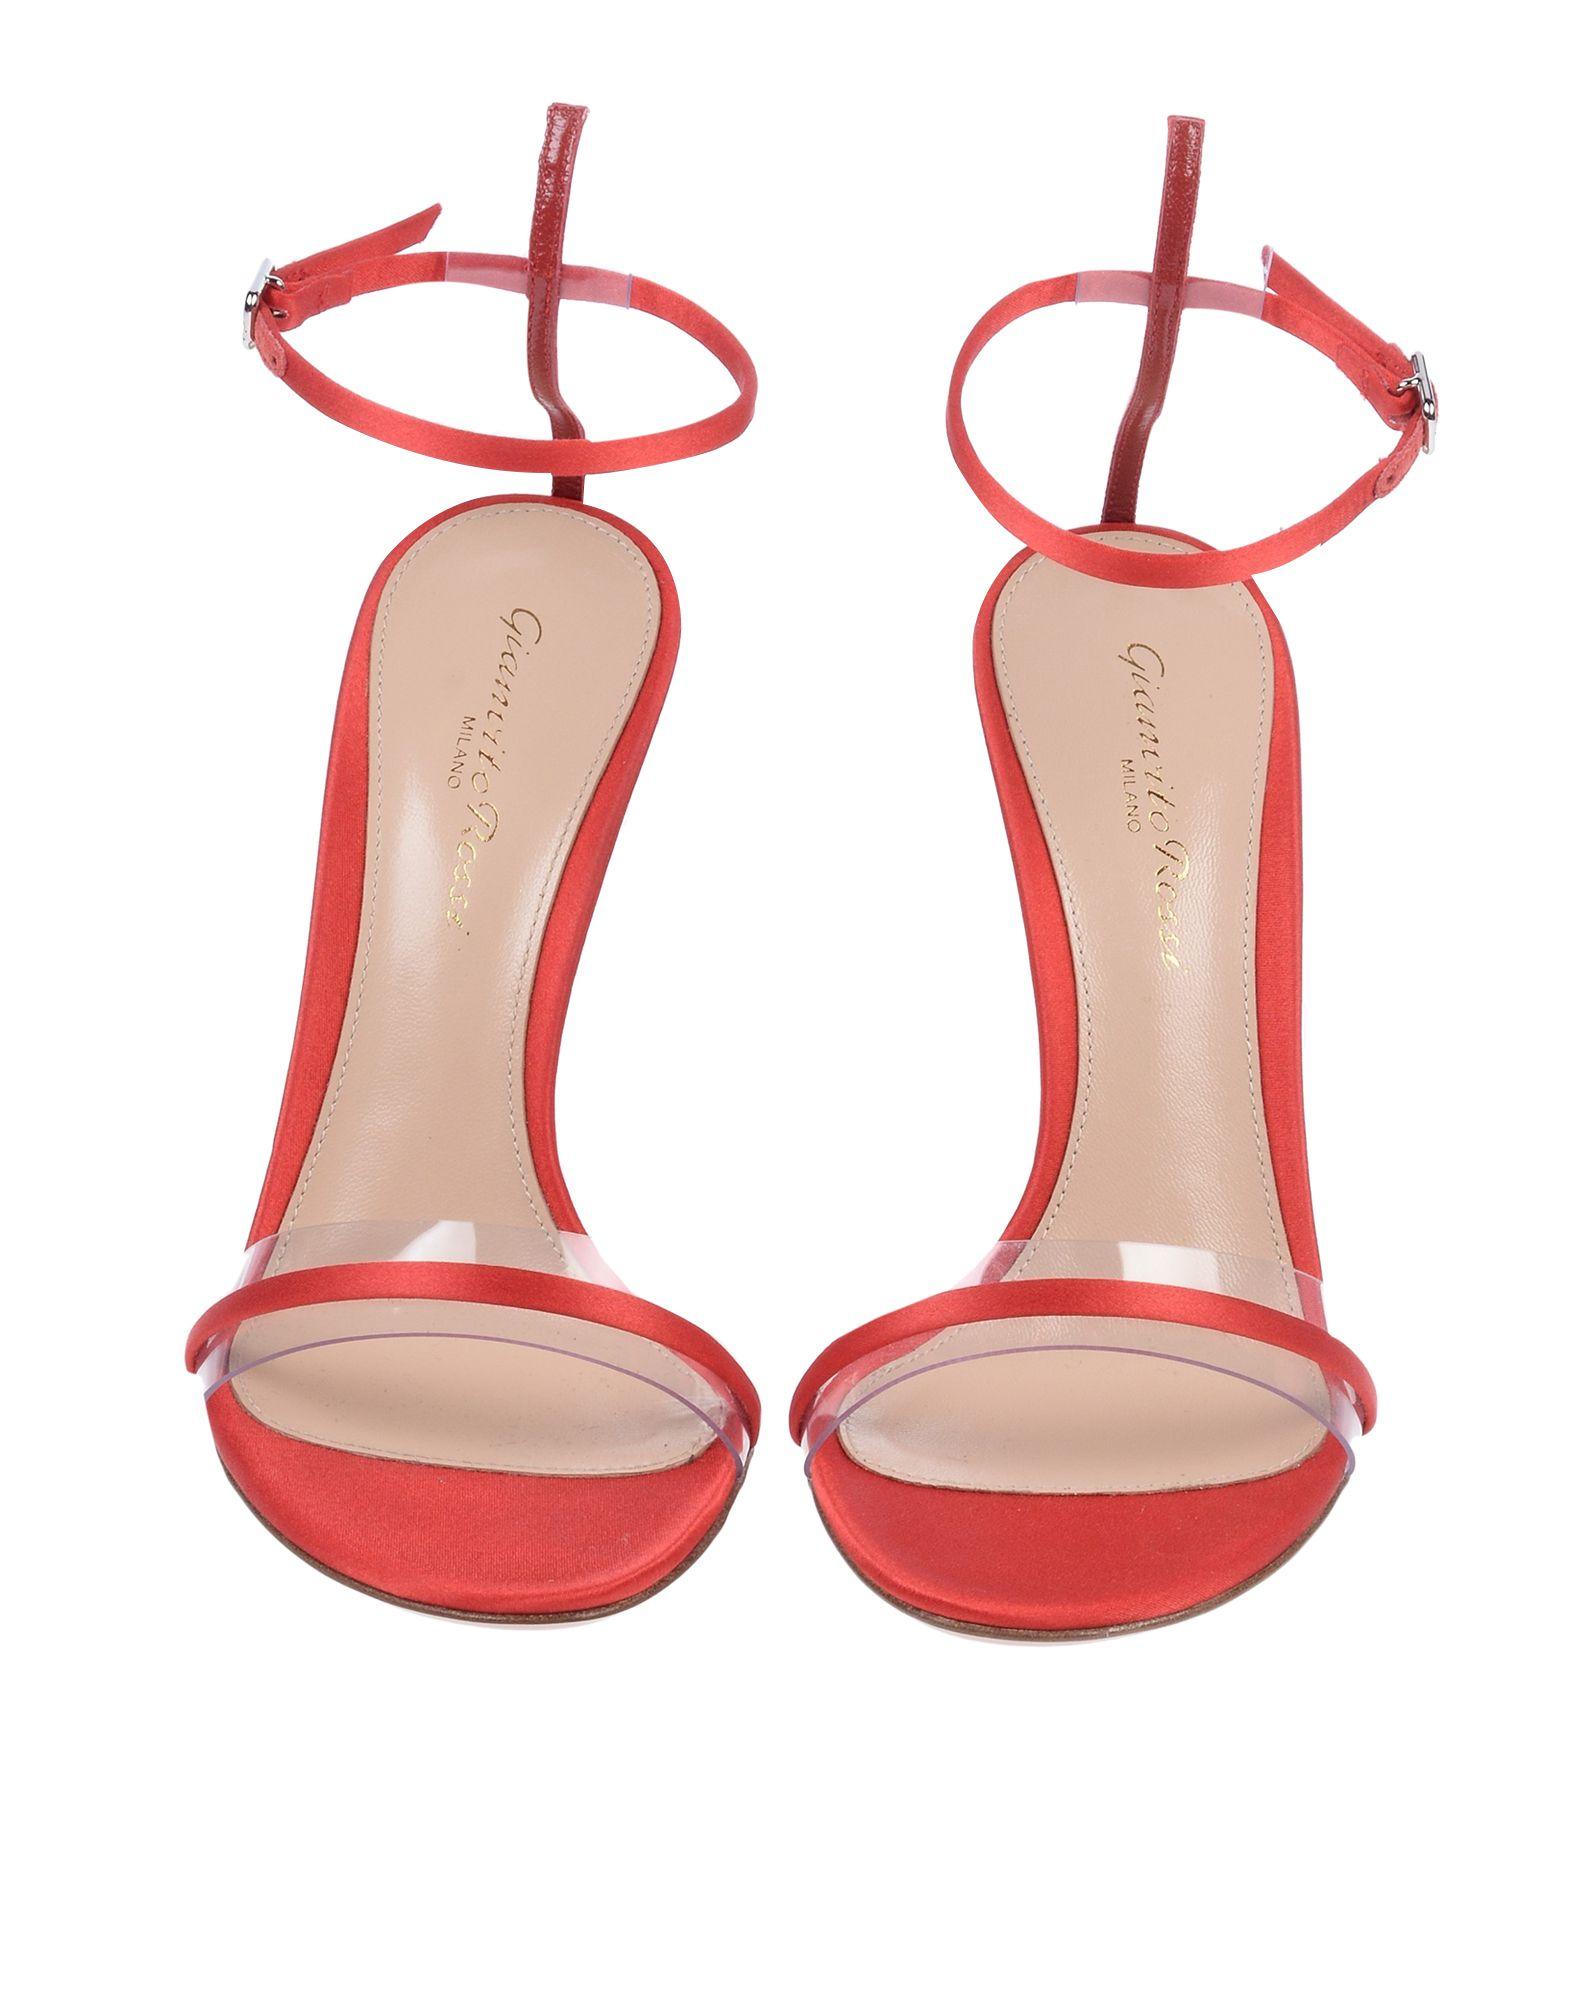 Gianvito Rossi NEW Red Satin Clear PVC Ankle Evening Sandals Heels in Box

Size IT 36
Satin
PVC
Ankle buckle closure
Made in Italy
Heel height 4.25